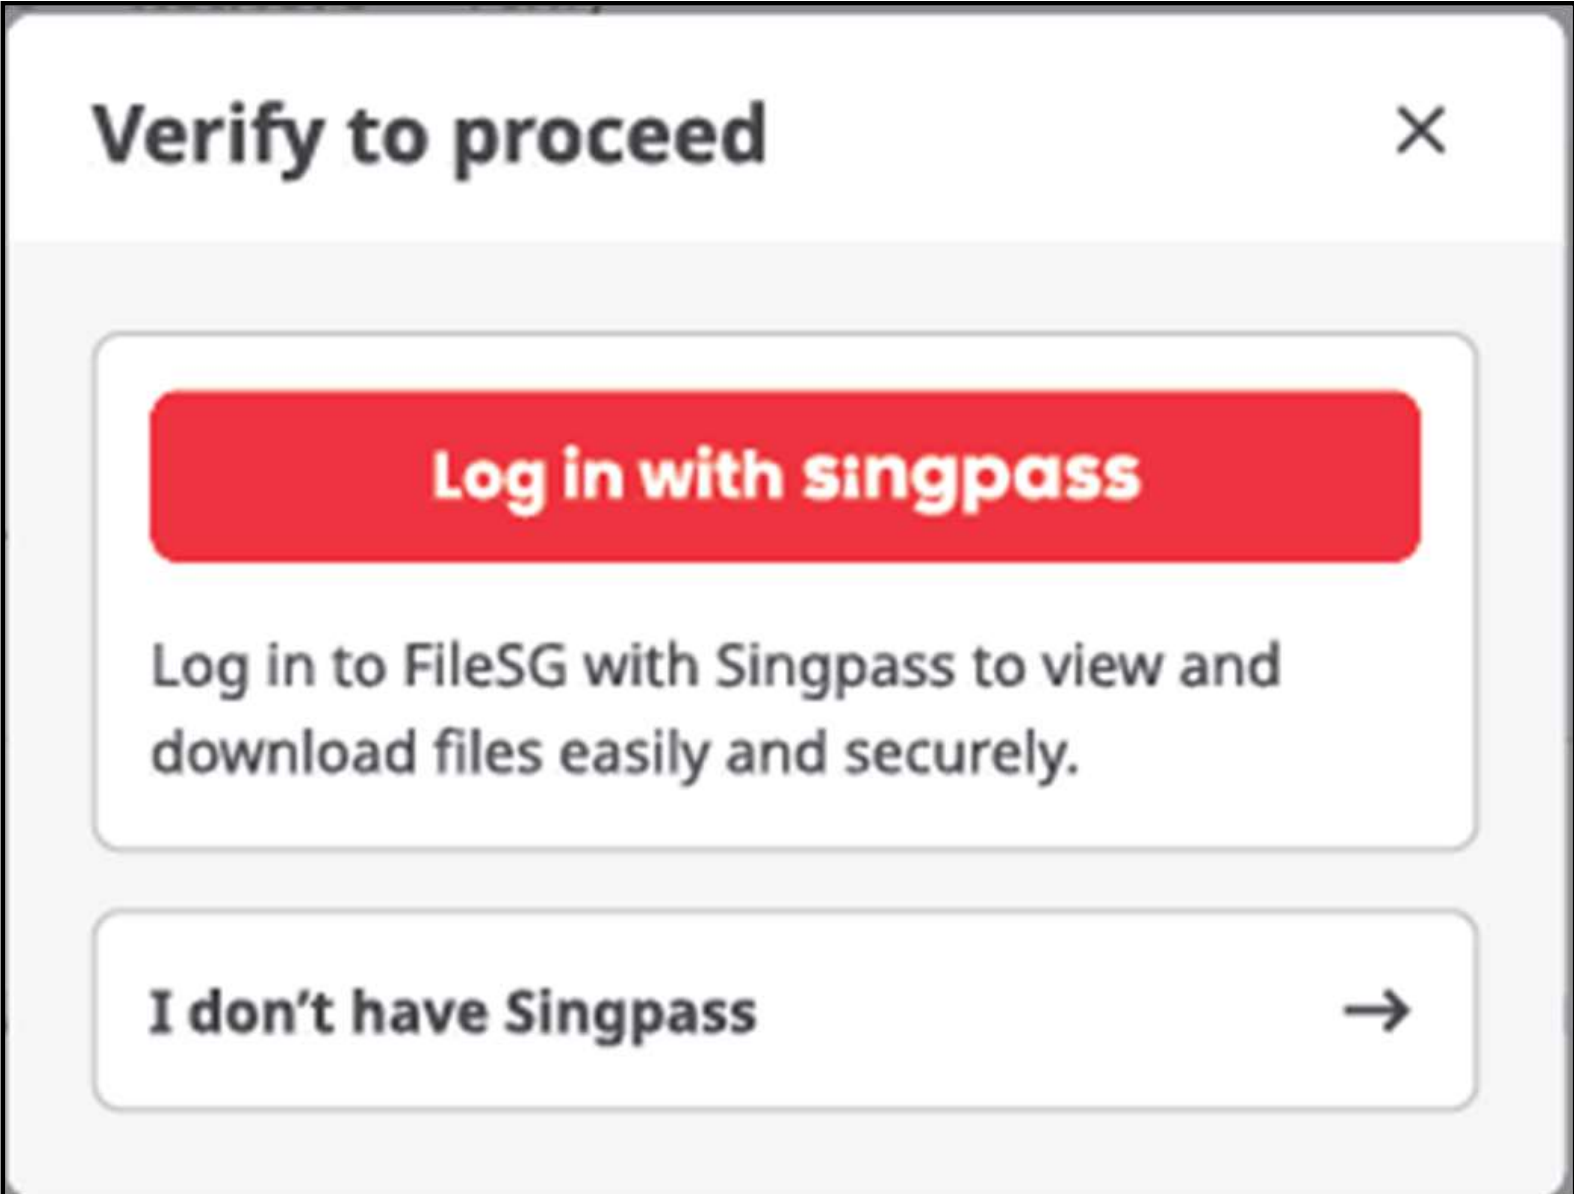 Log in with Singpass